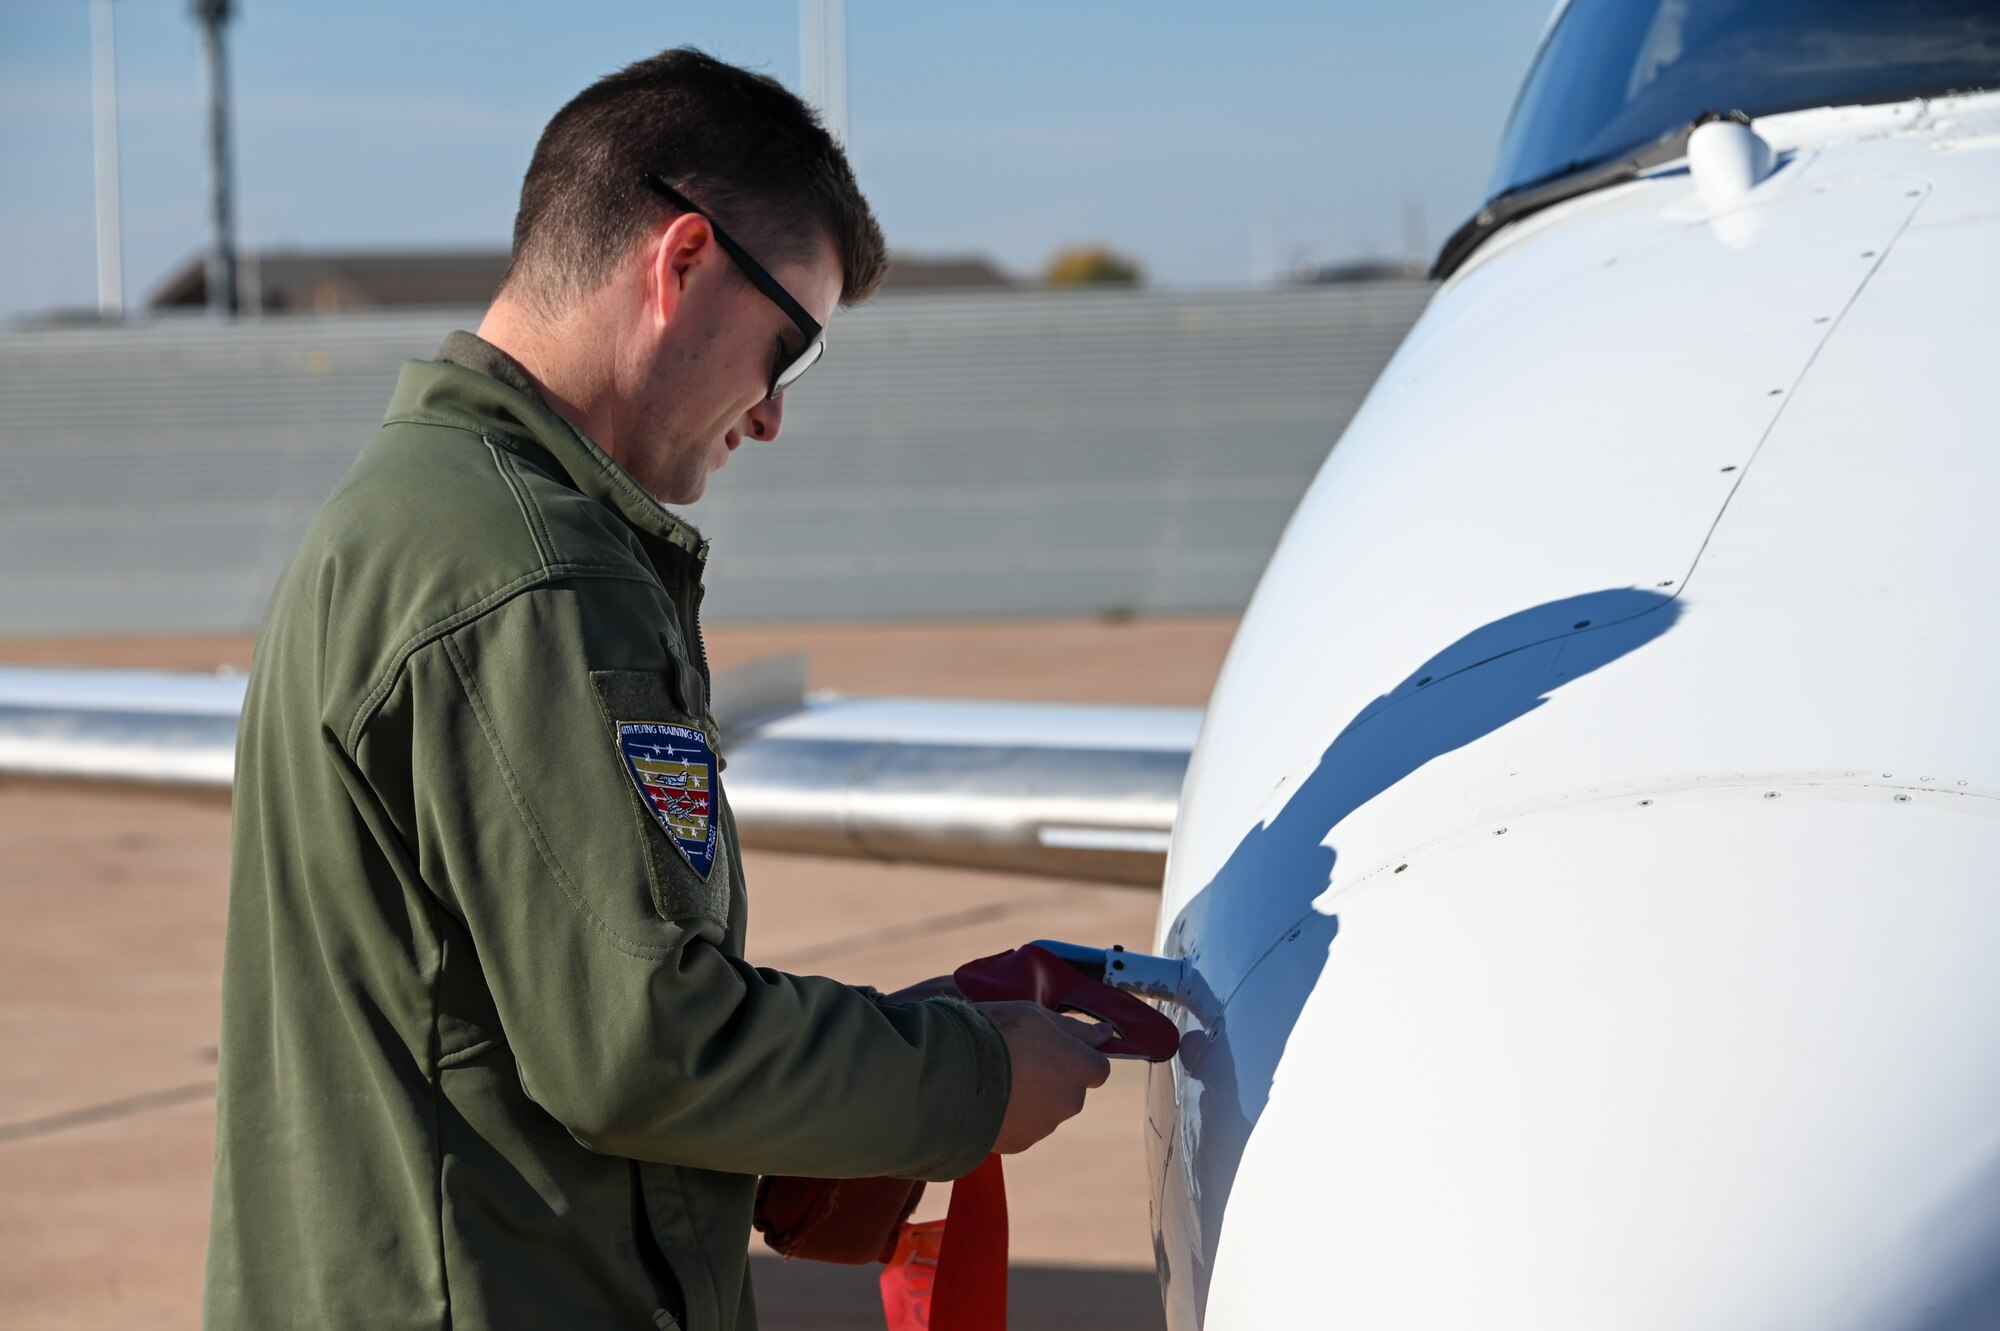 U.S. Air Force Capt. Brendan Bailey, 48th Flying Training Squadron instructor pilot, attaches a pitot cover on a T-1 Jayhawk at Altus Air Force Base (AFB), Oklahoma, Nov. 15, 2022. Bailey was able to fly on the KC-46 Pegasus and watch in-flight refueling while at Altus AFB. (U.S. Air Force photo by Senior Airman Kayla Christenson)